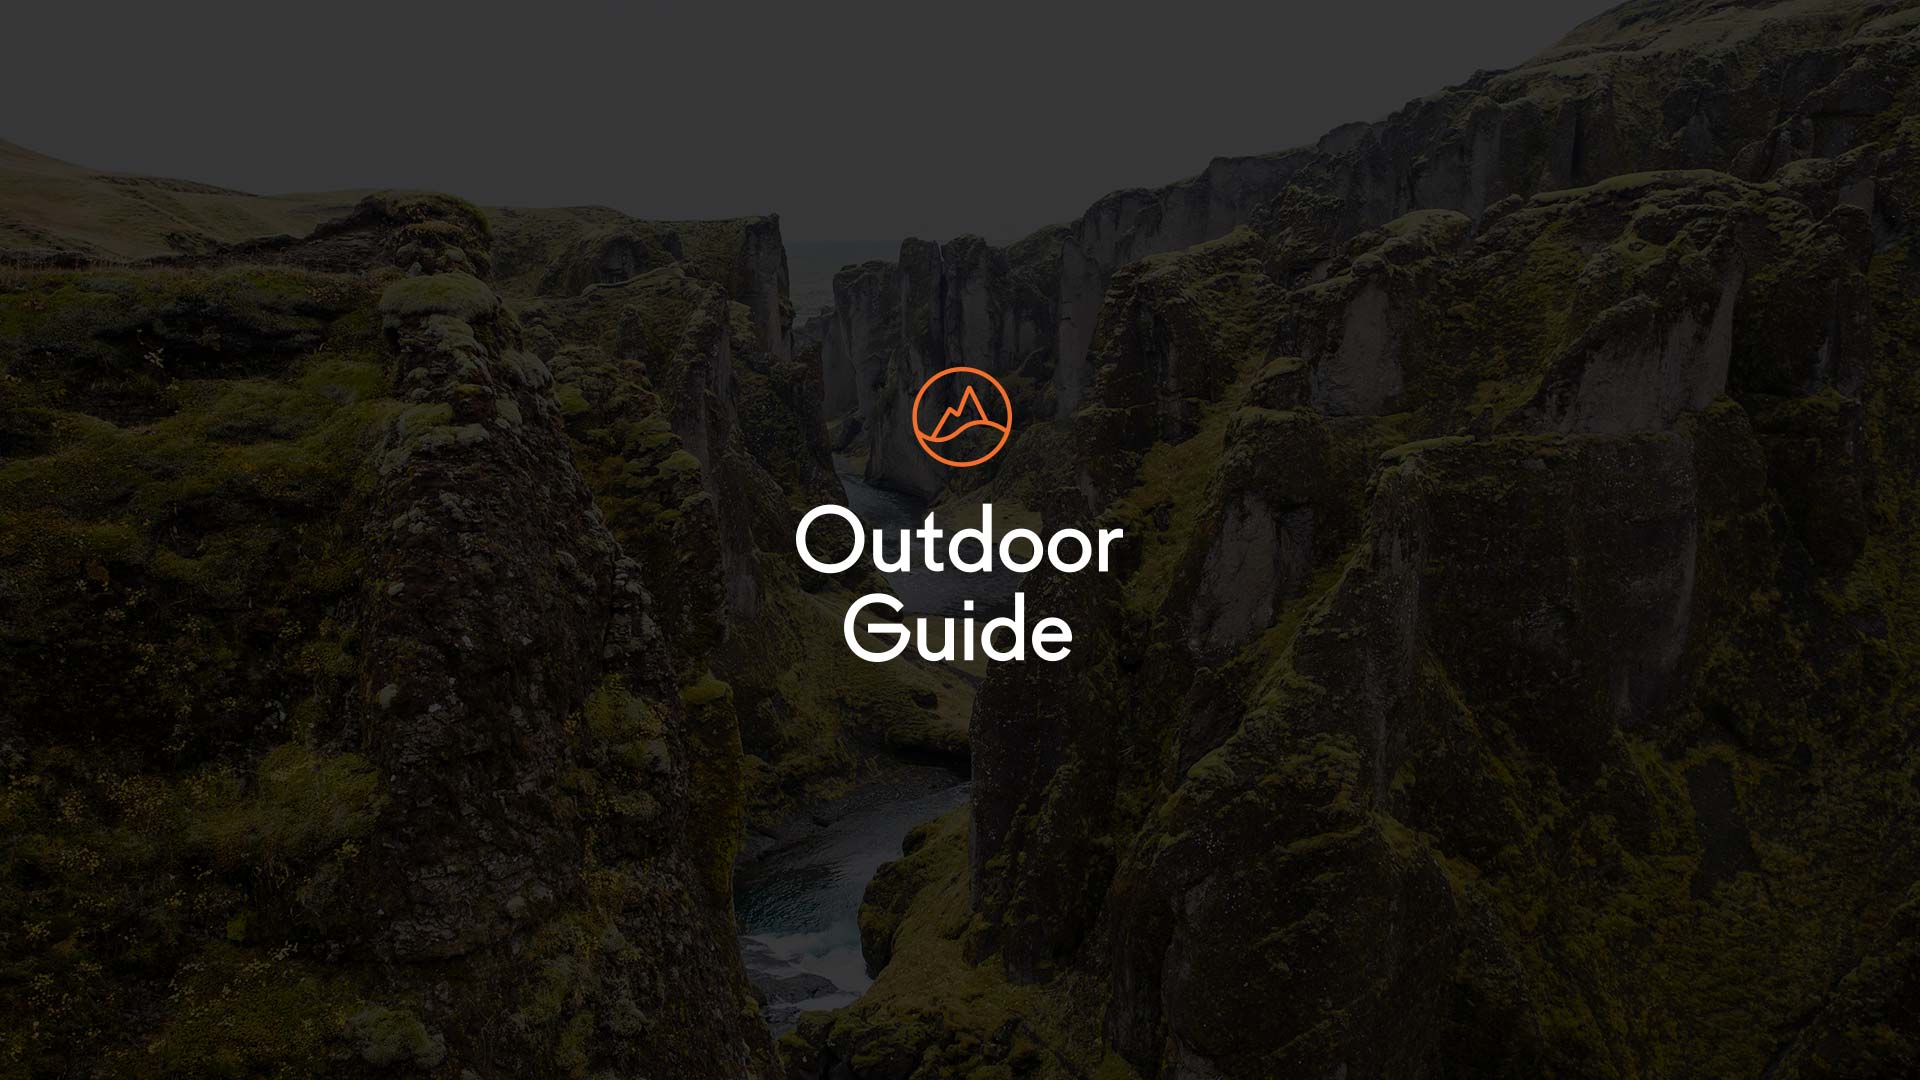 Outdoor Guide Logo on an Image of a Canyon